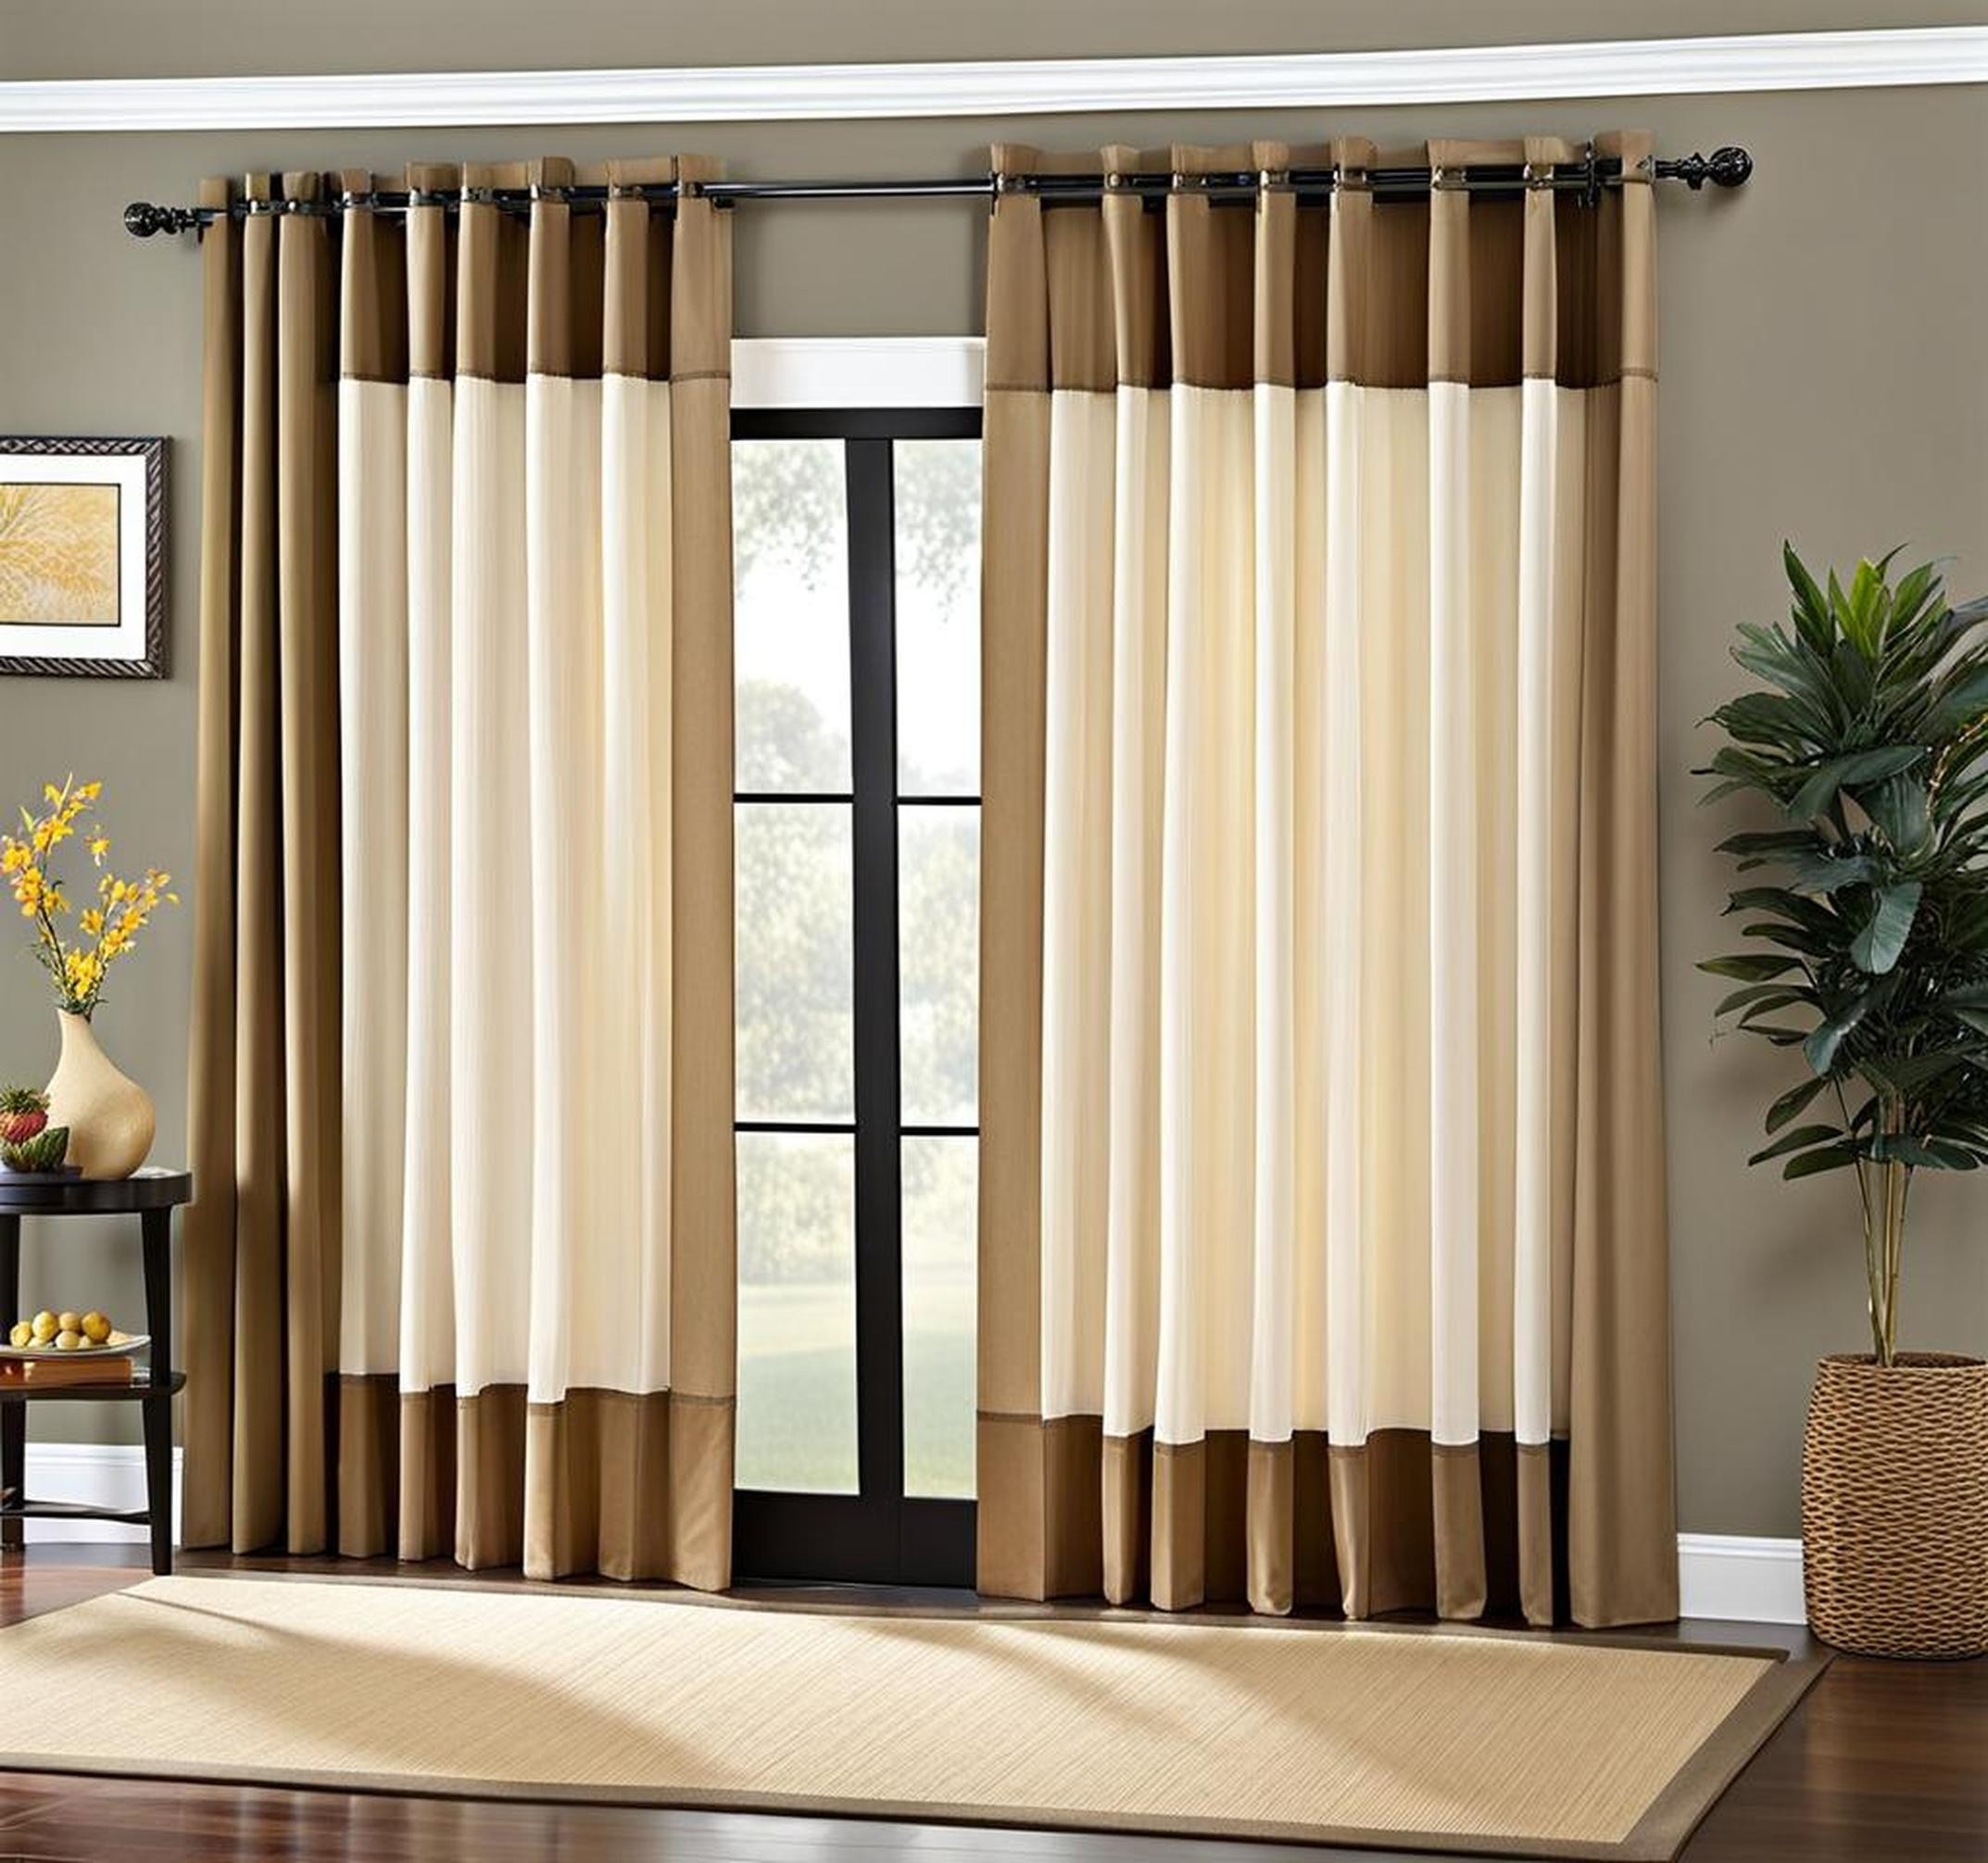 what size curtains for sliding glass door